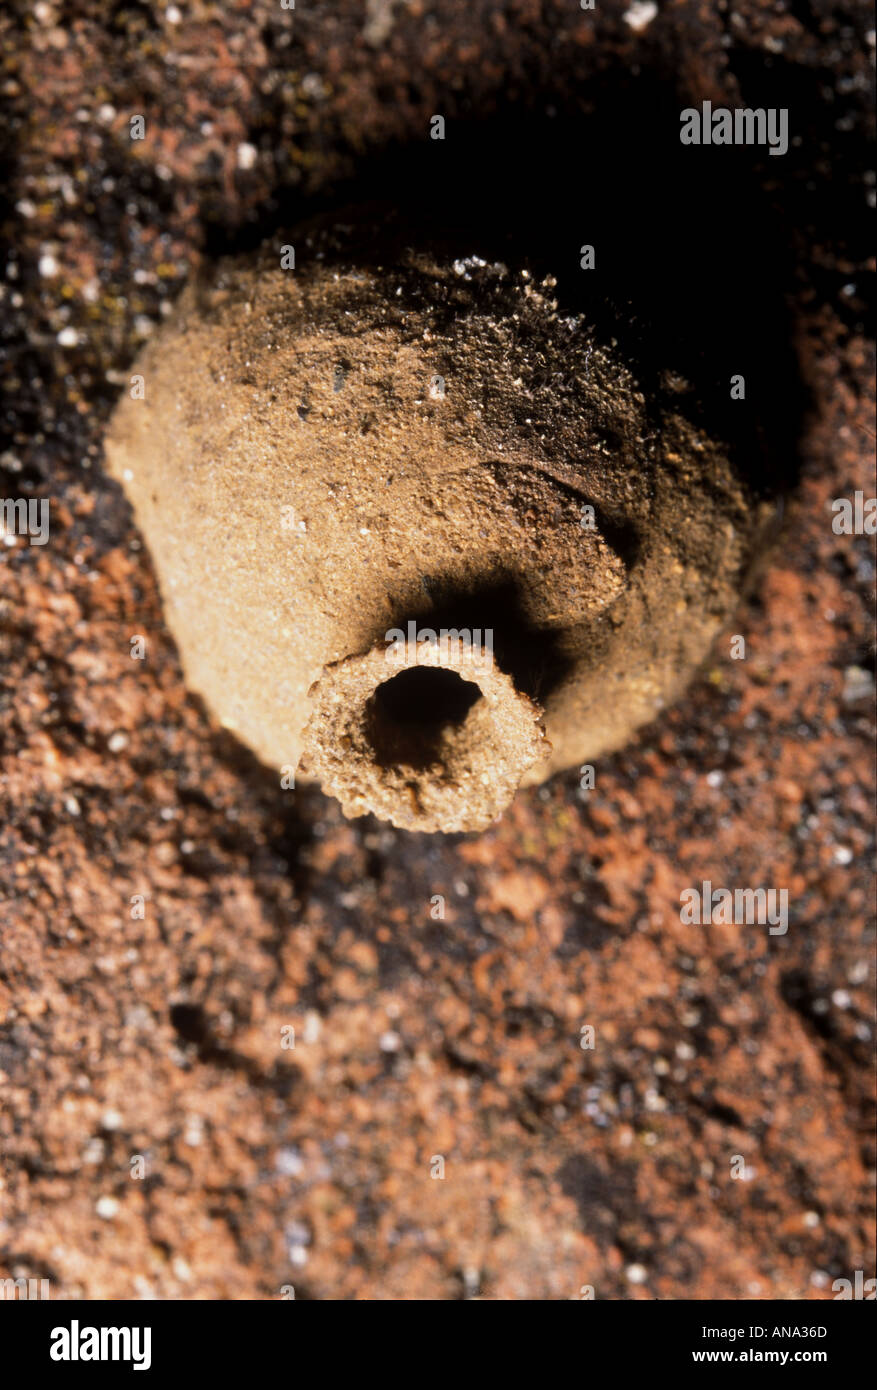 nest of Potter Wasp Vespidae Eumeninae also known as the mason wasp Stock Photo